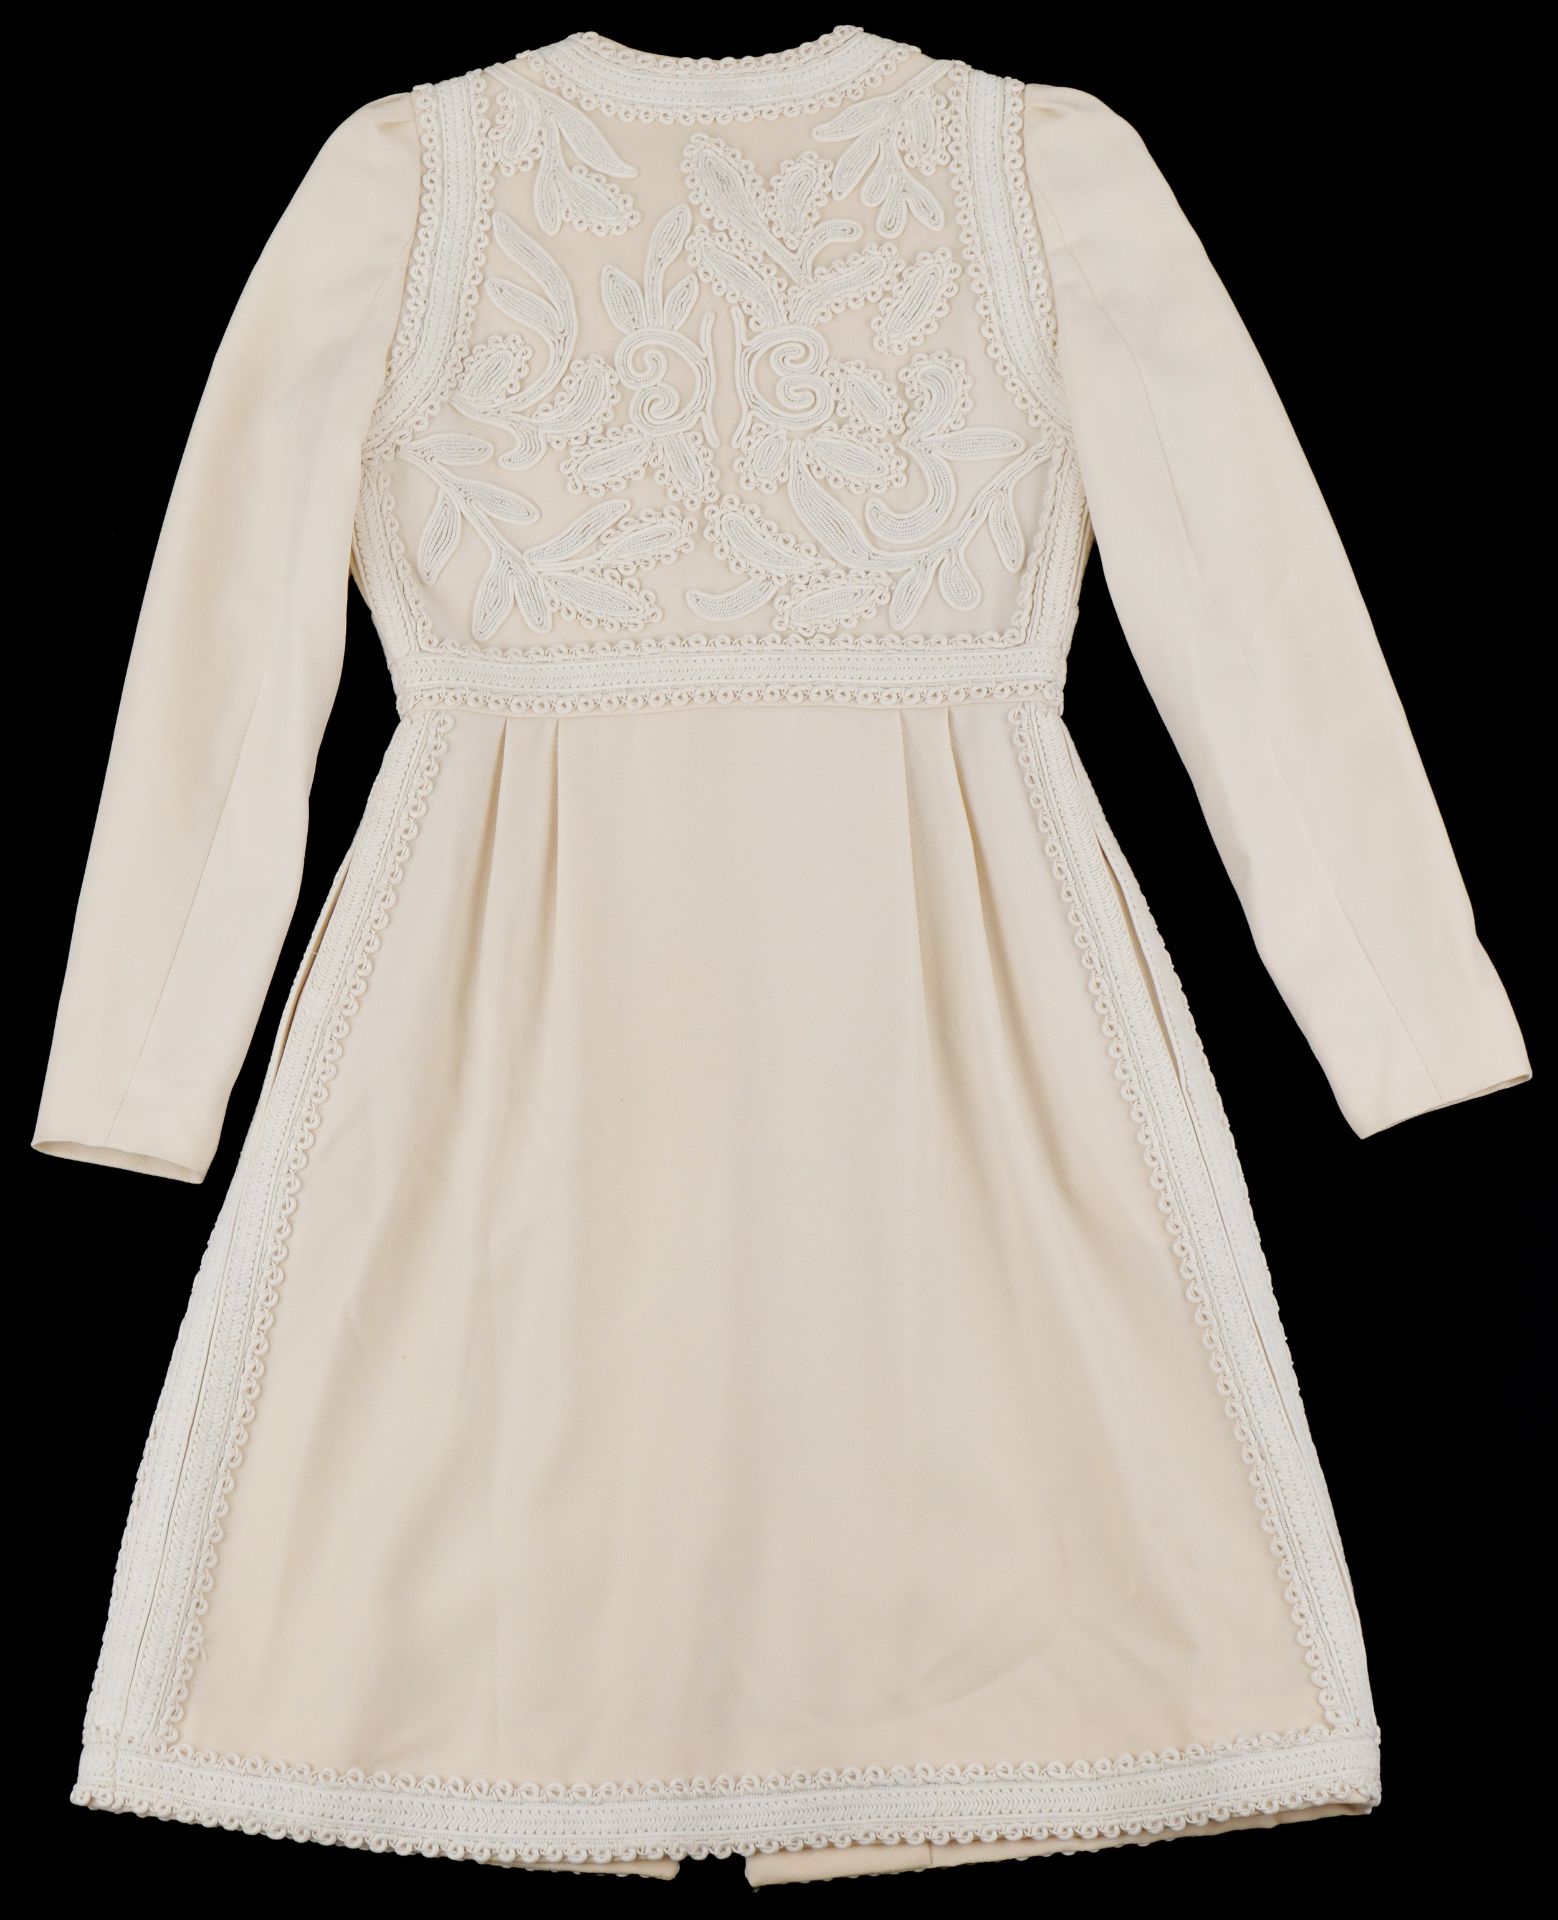 Valentino, embroidered ladies smock dress, size 6 - Image 5 of 6